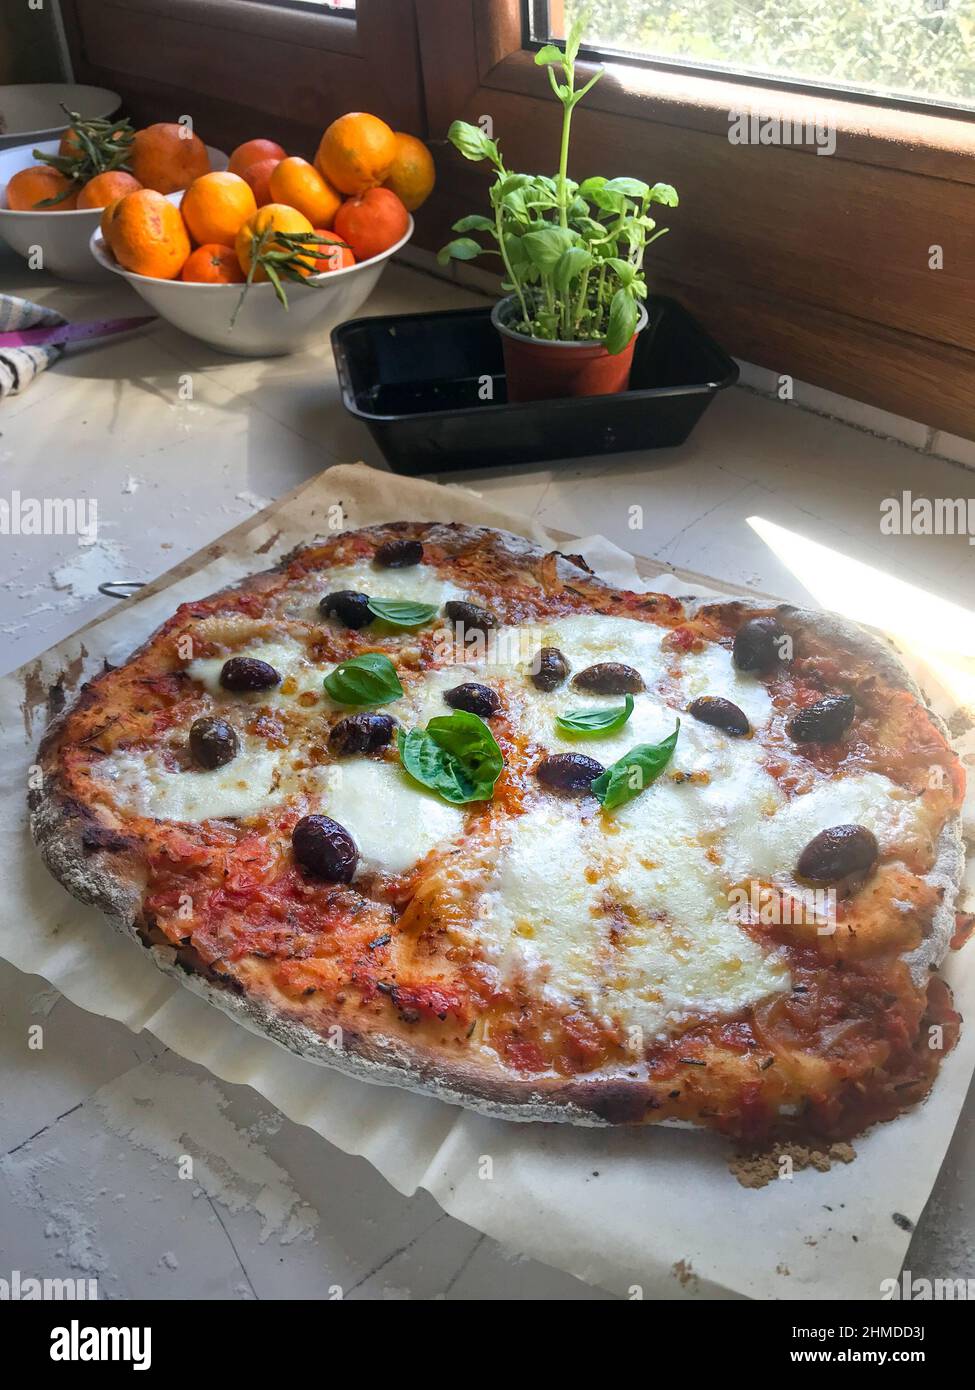 Freshly homemade pizza served in plate on window sill at home Stock Photo